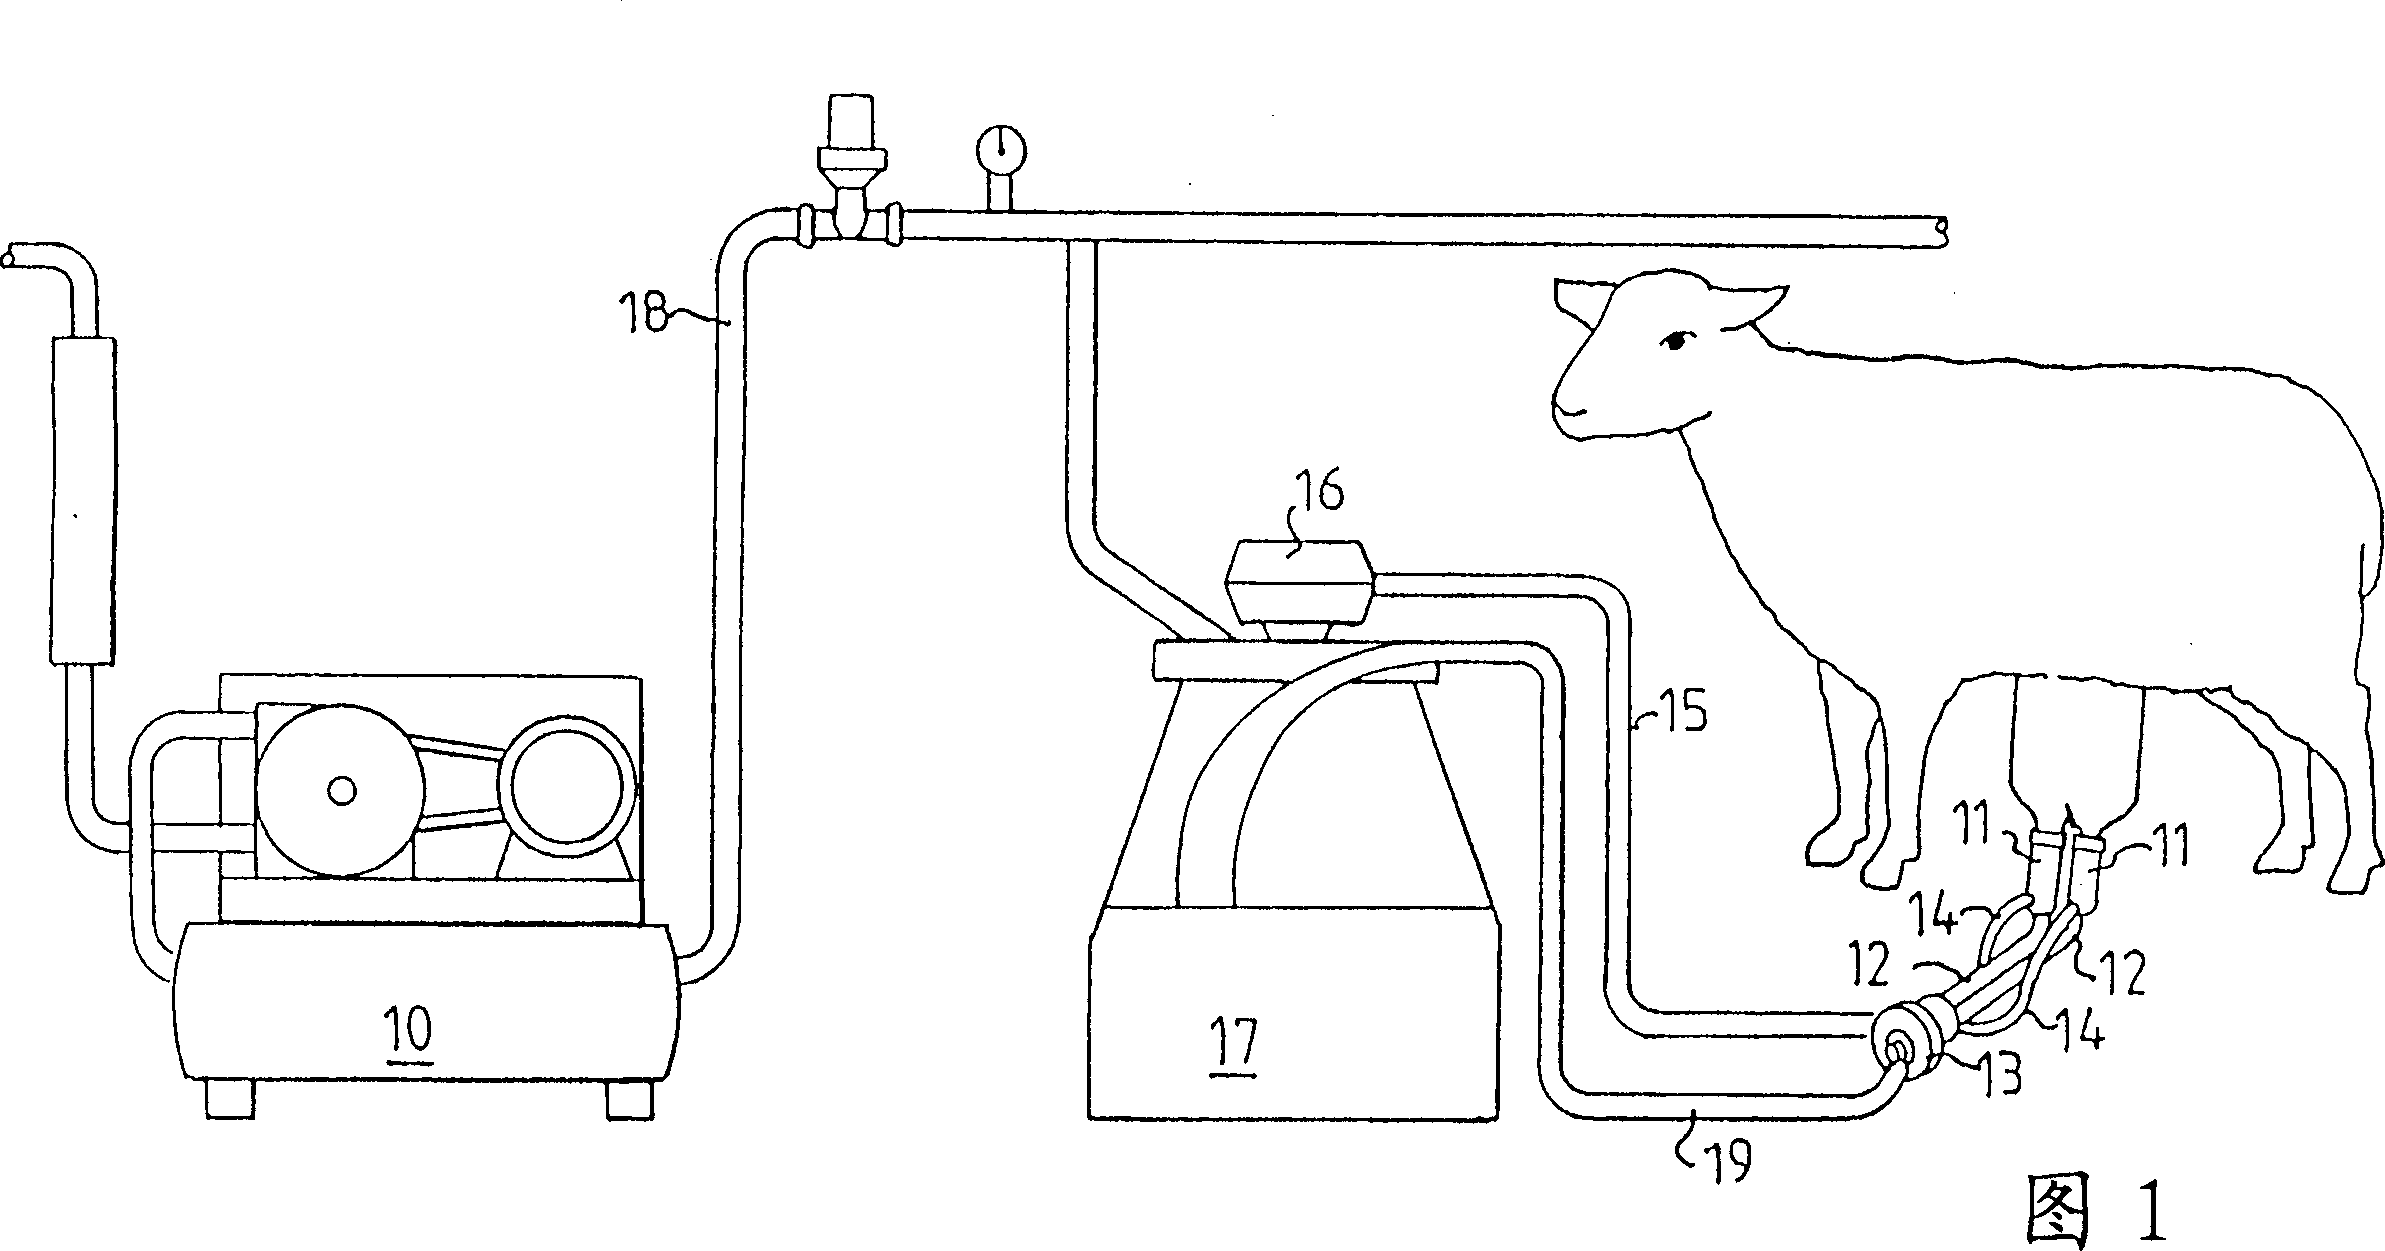 Valve, milking claw and milking system